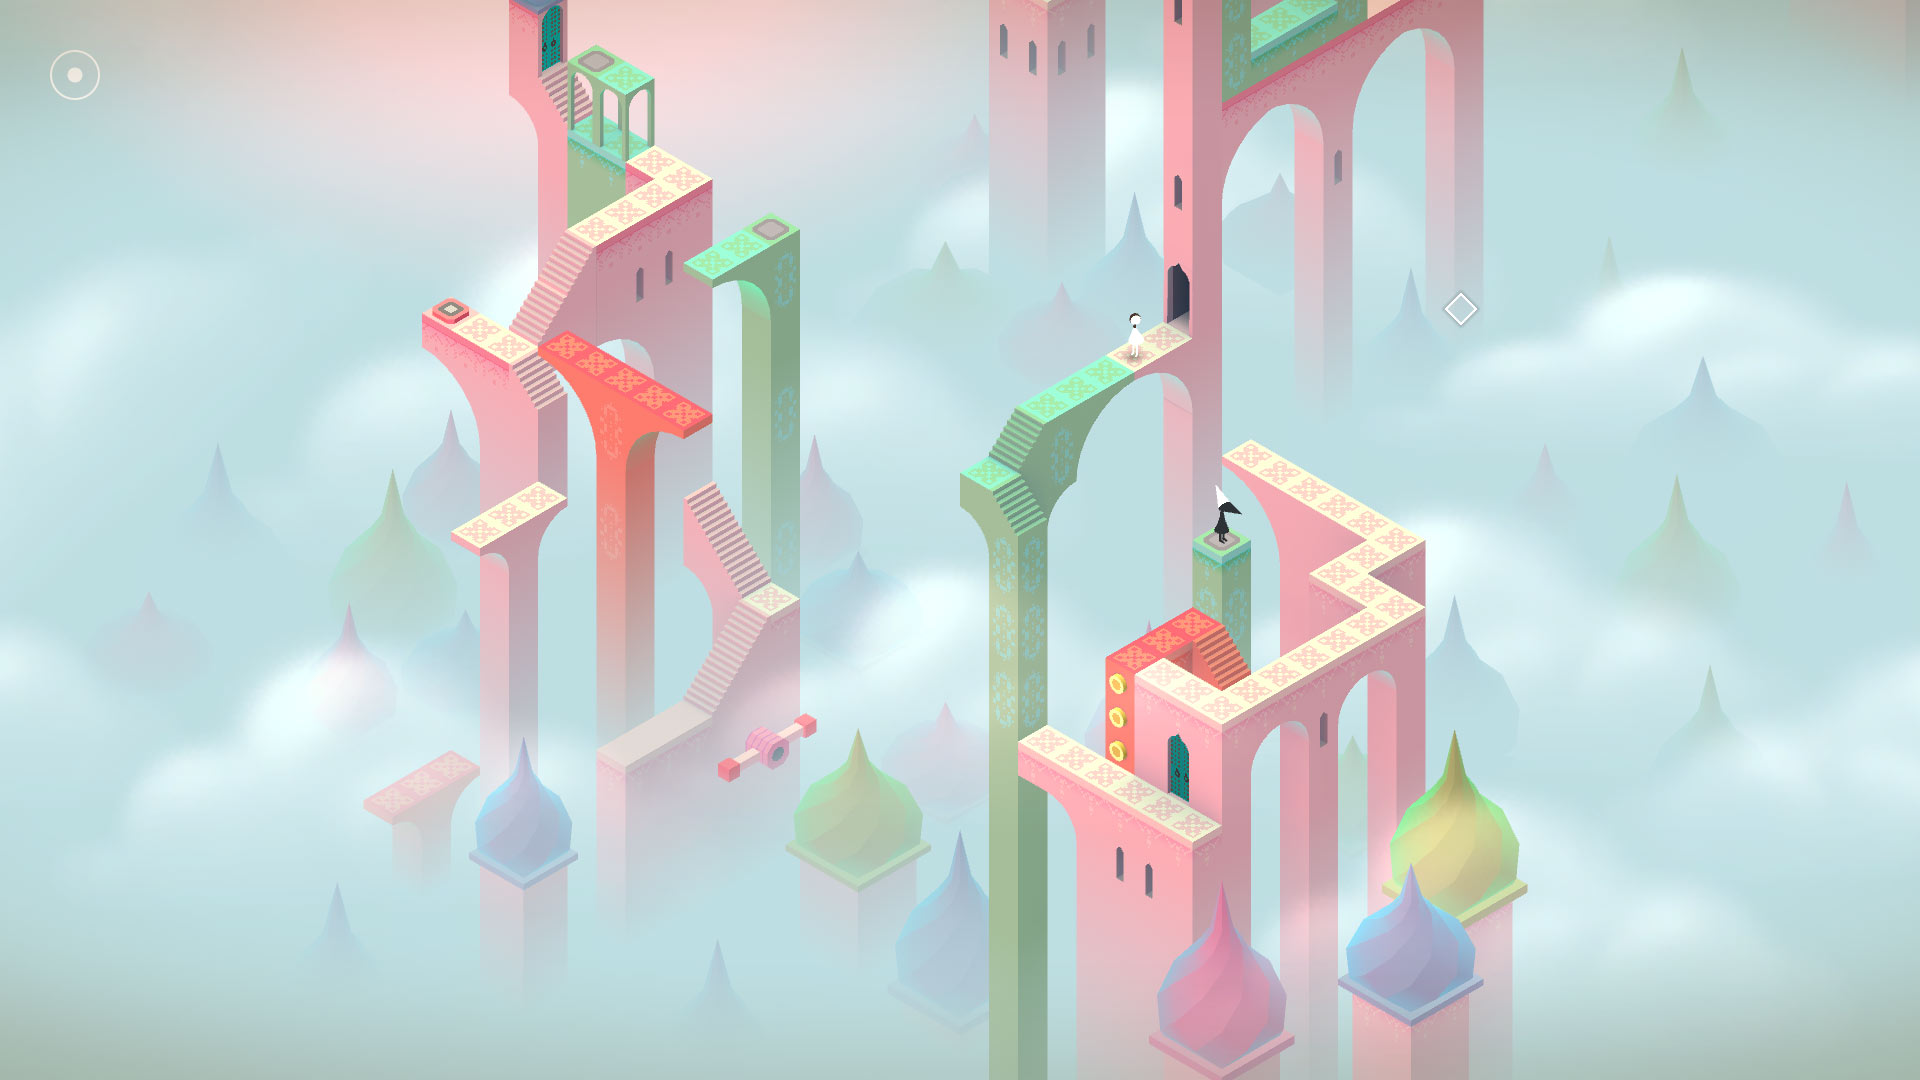 Monument Valley game series from Ustwo games